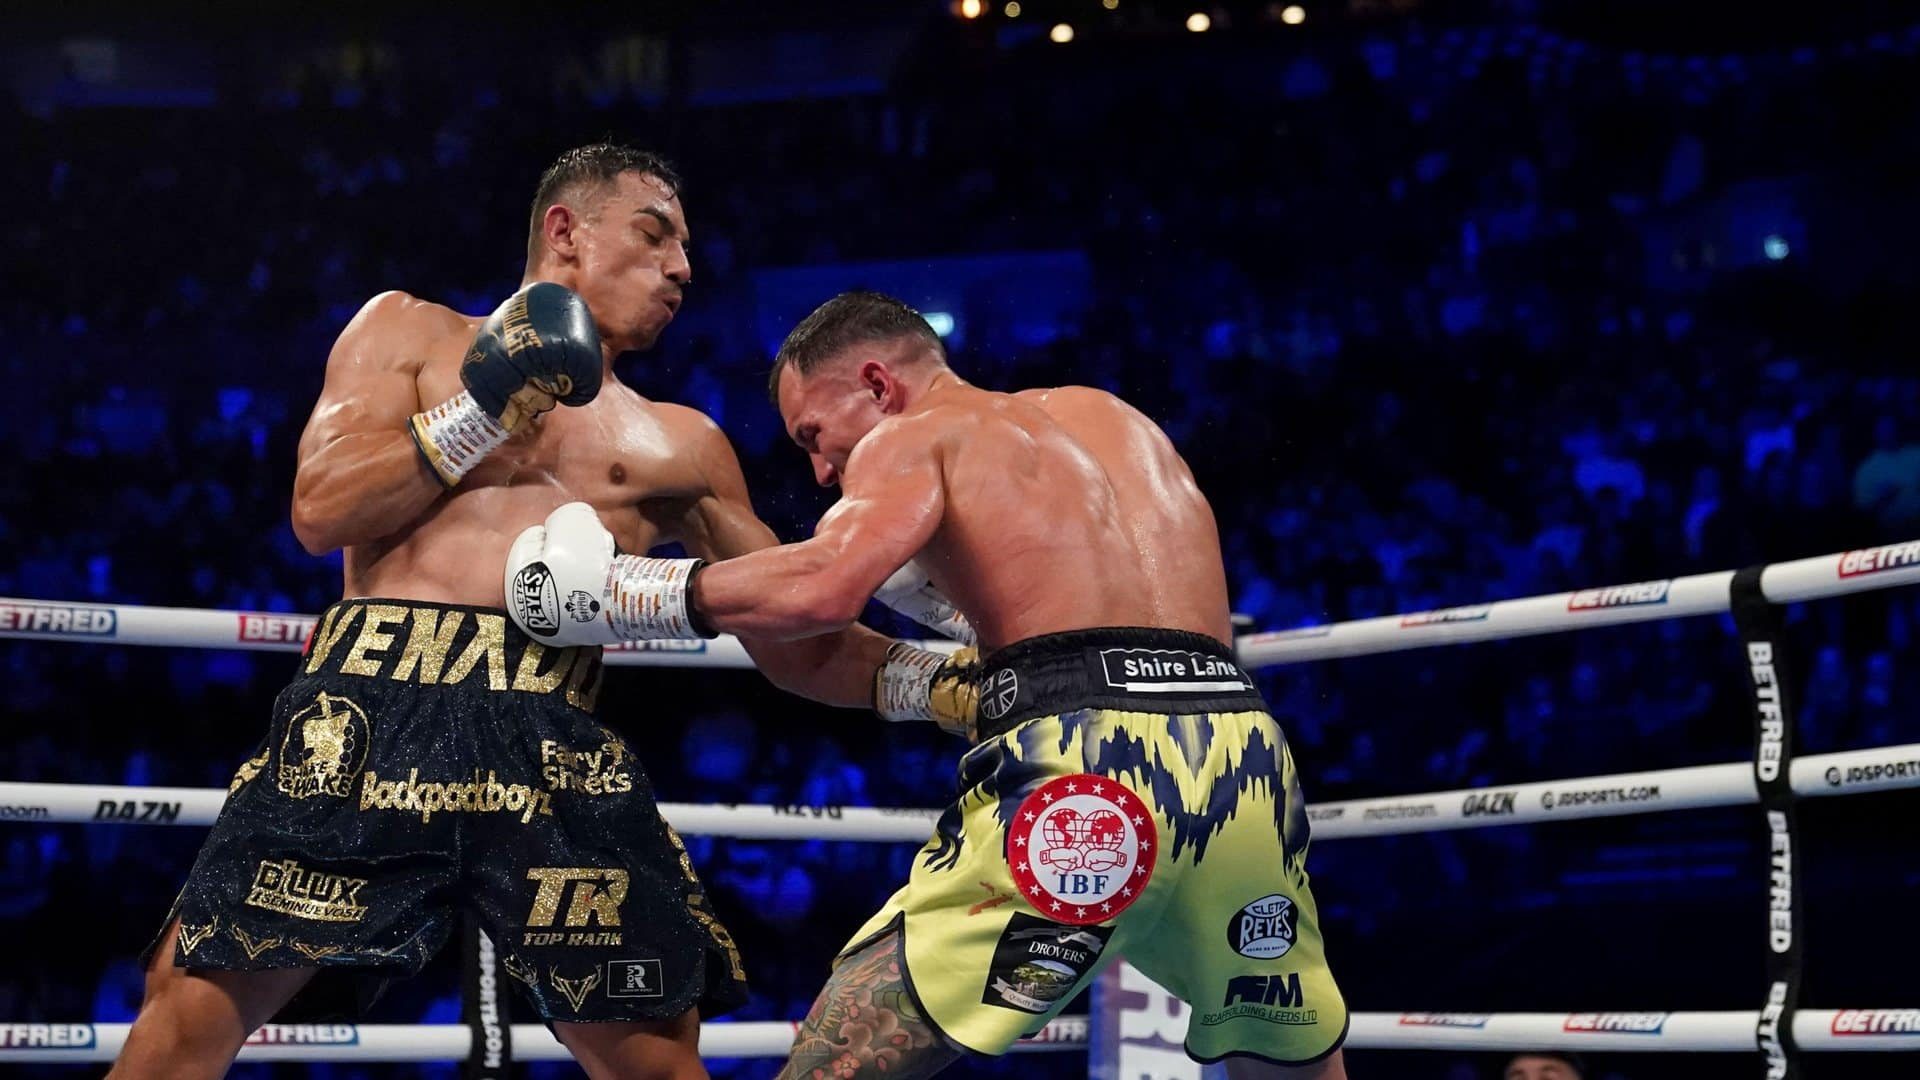 Luis Alberto Lopez and Josh Warrington fighting at Leeds Arena, each punching the other in the stomach at the same time, which is about how it went